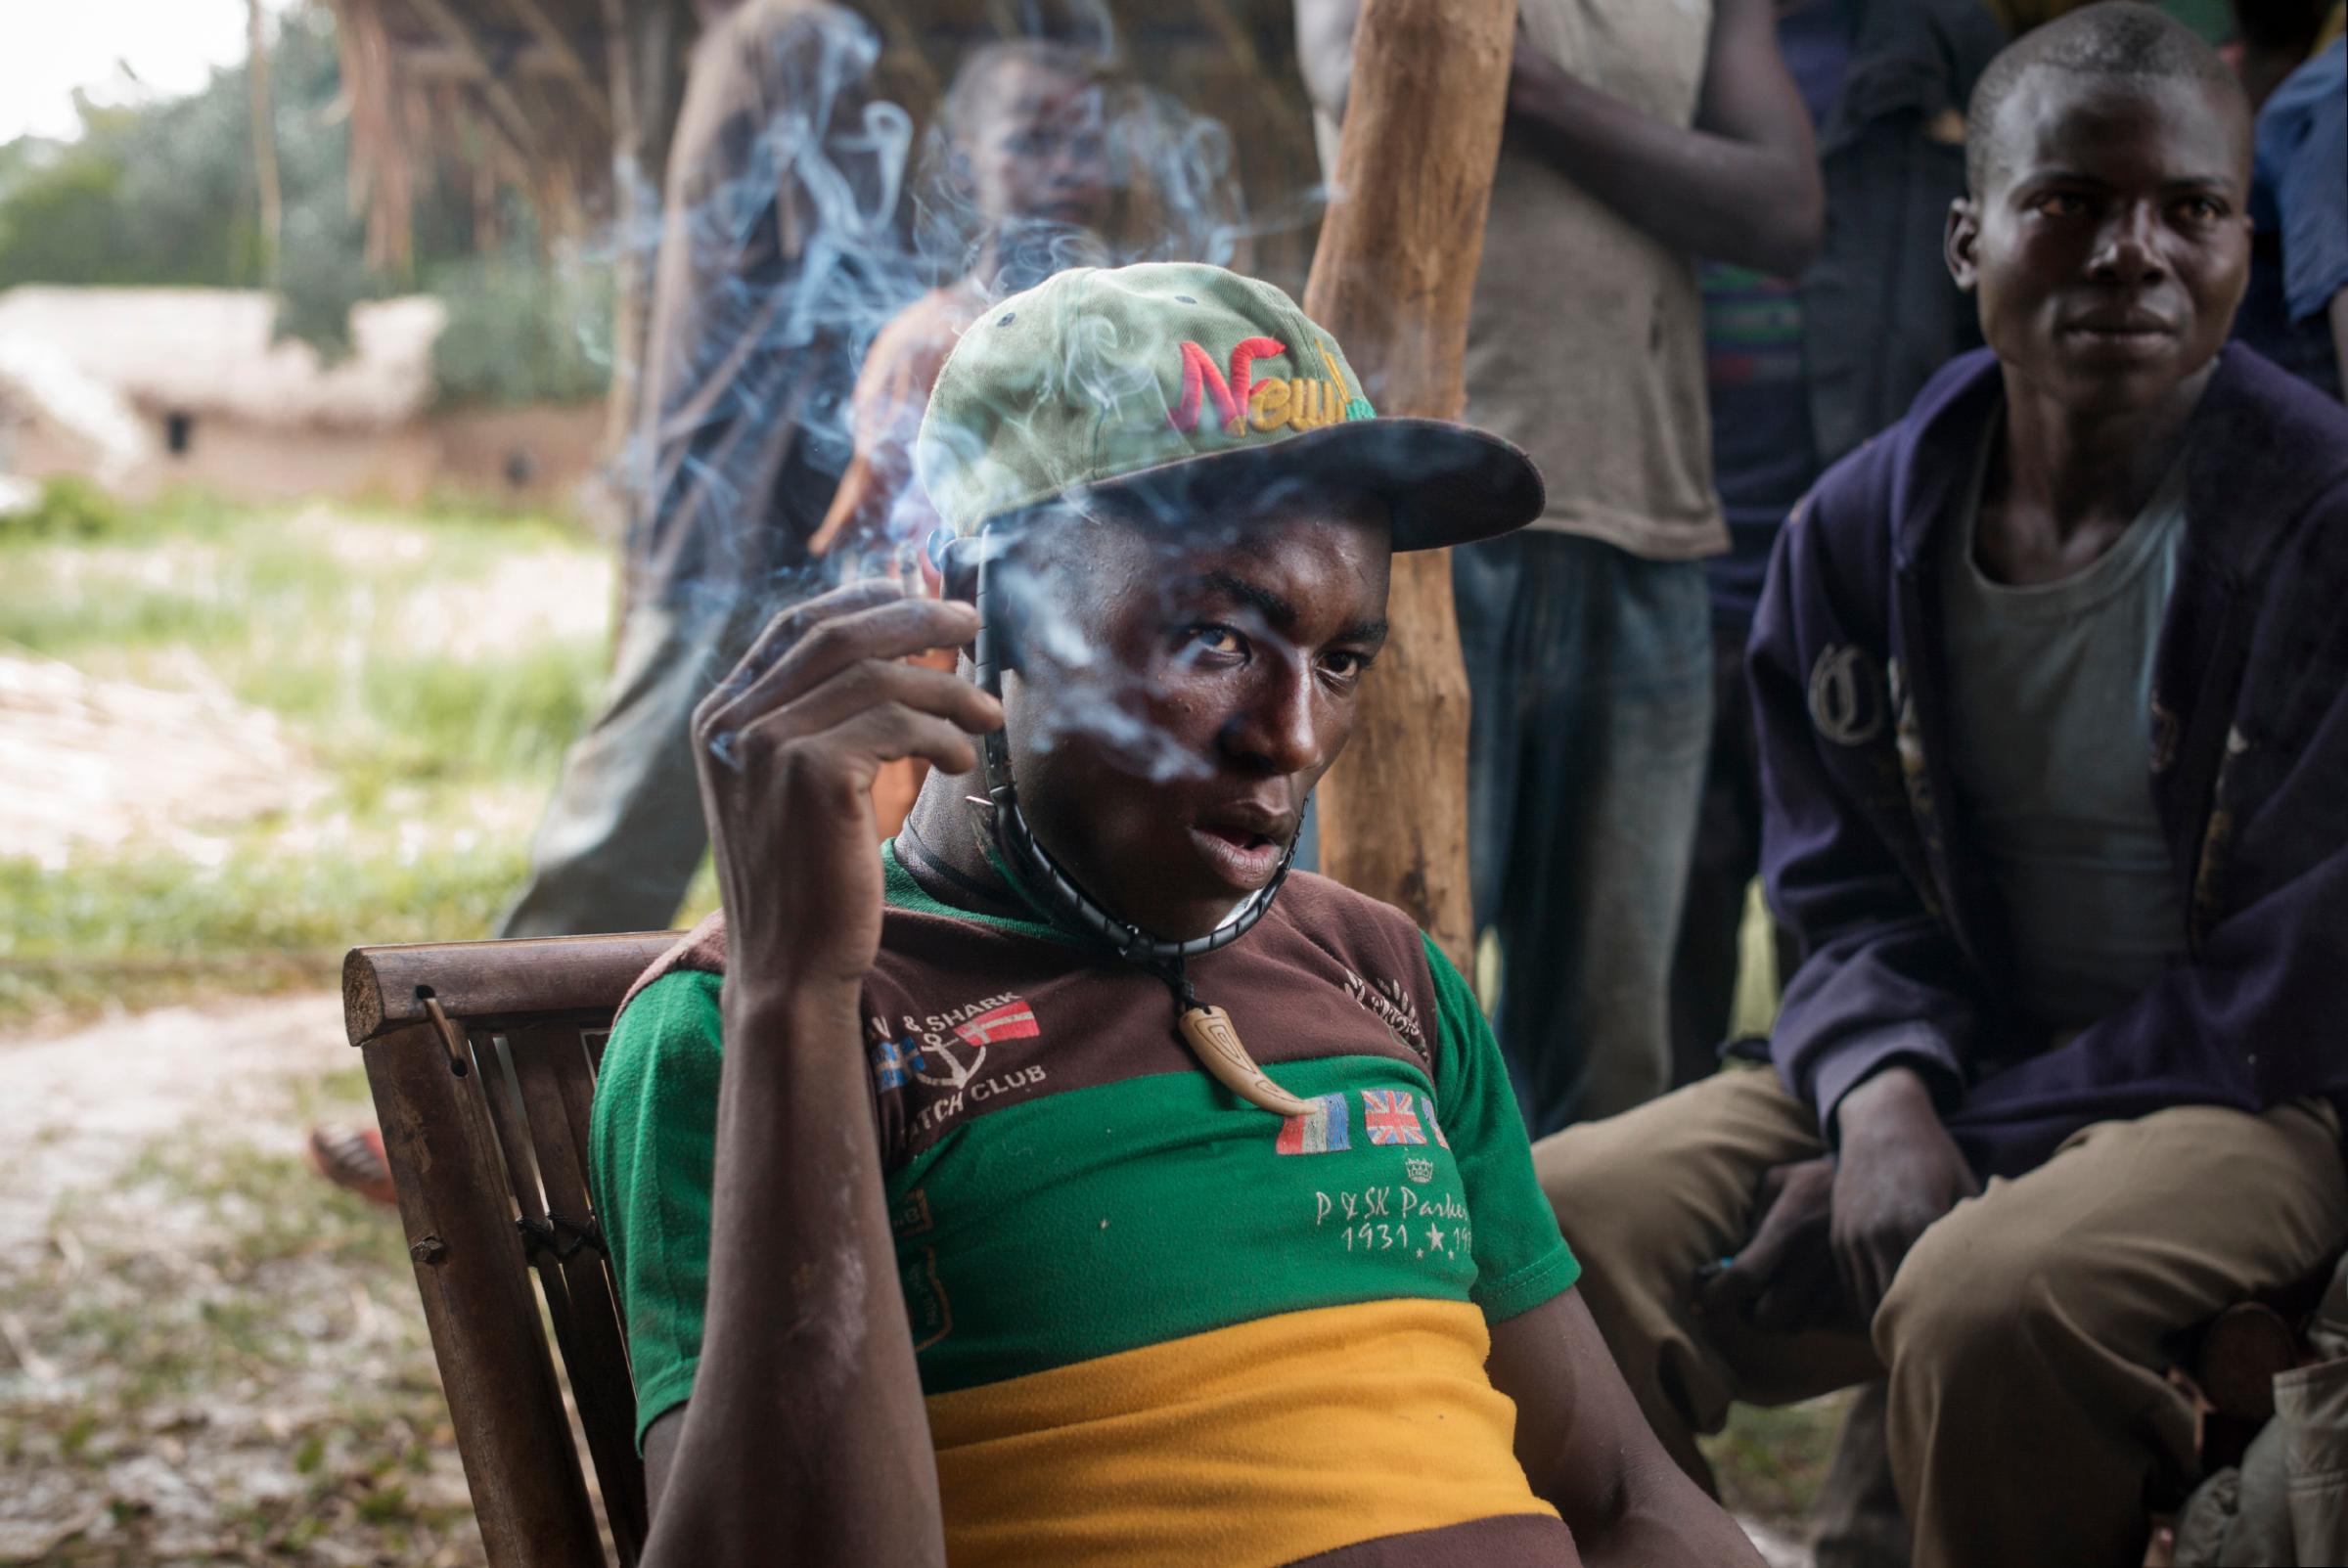 A leader of an antibalaka militia group, Pelé, smokes a cigarette in the village of Balakadja, Central African Republic, on Aug. 4, 2015.